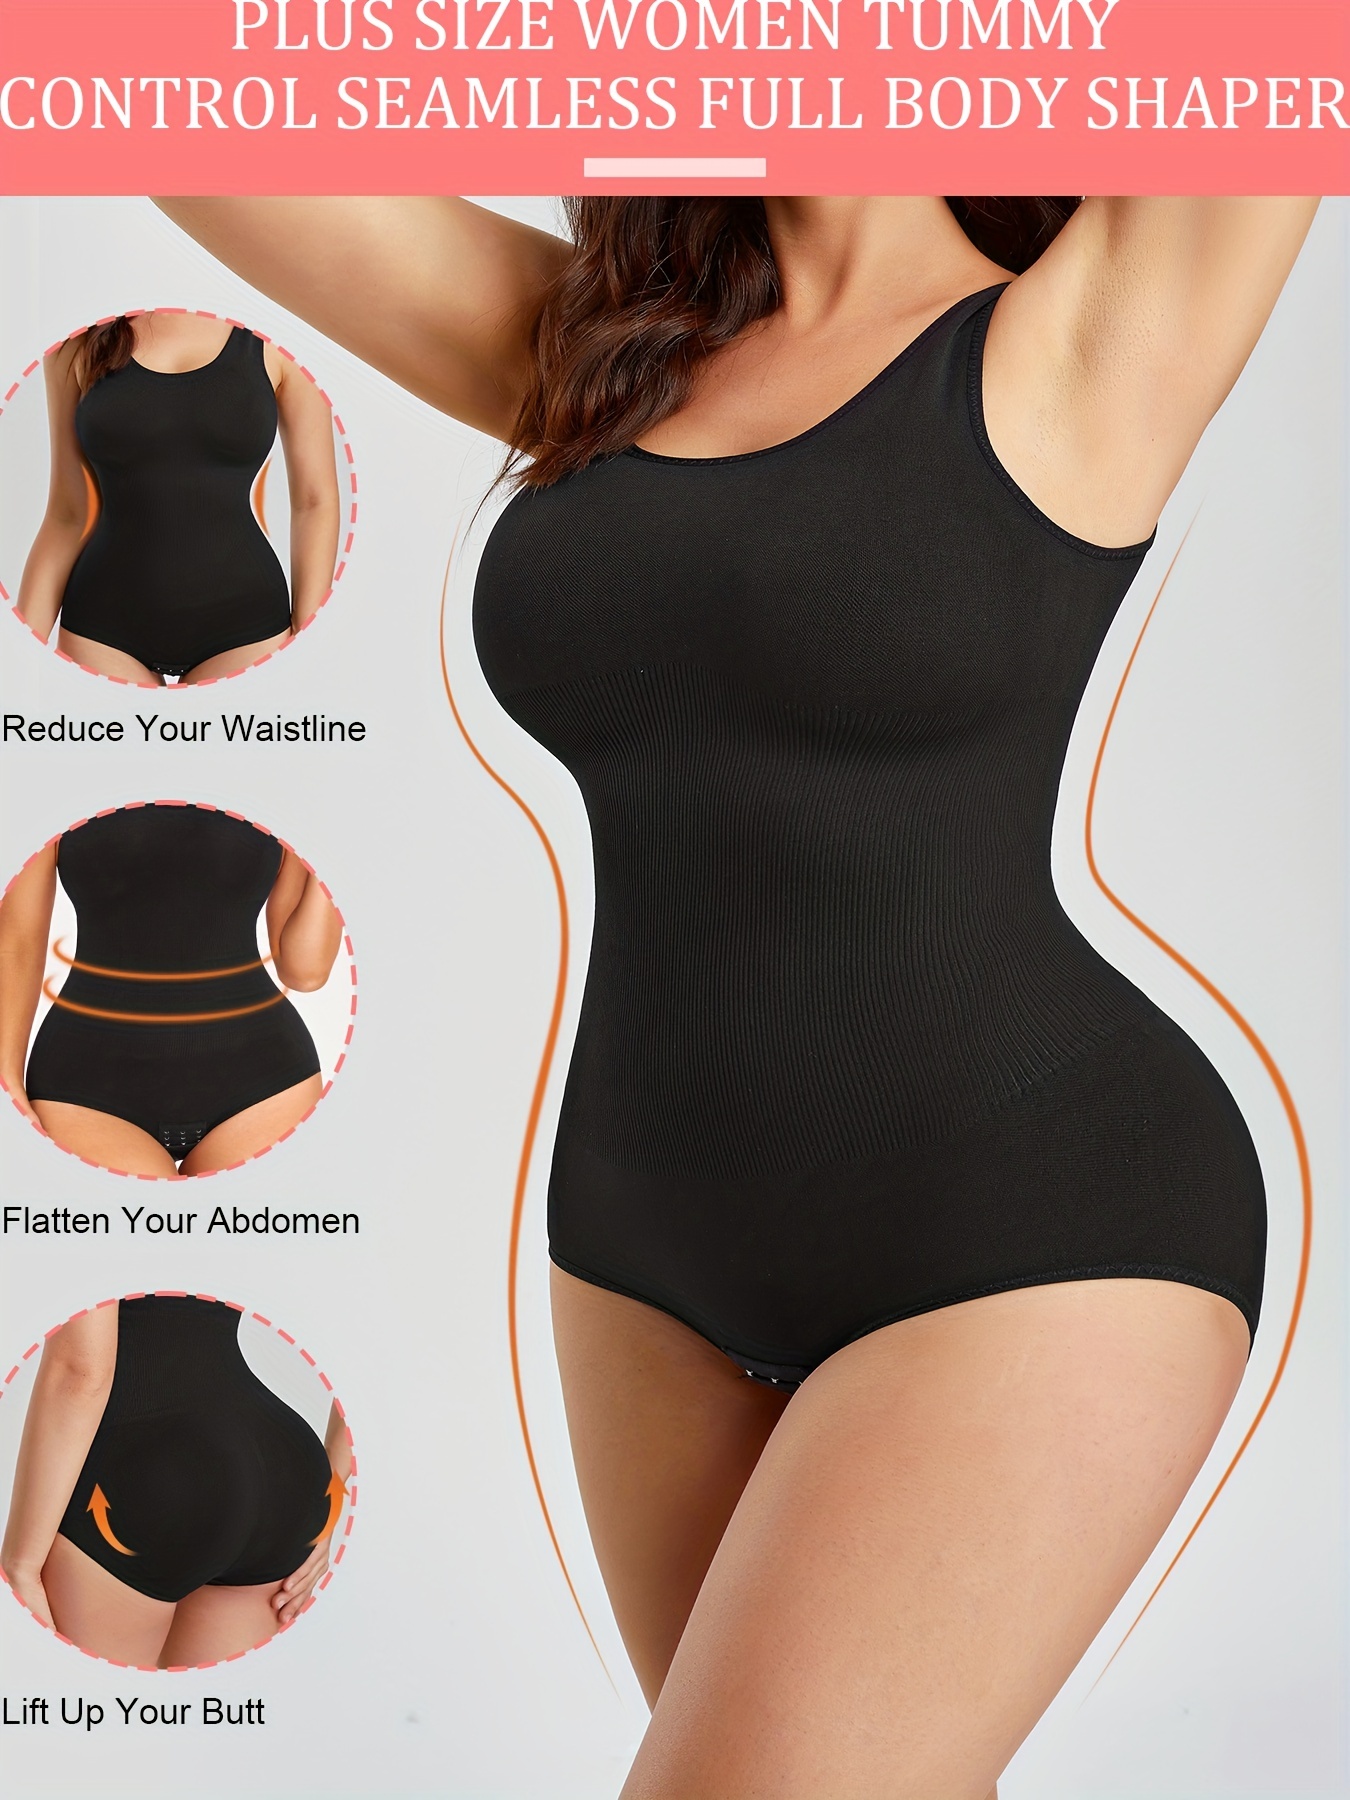 Strapless girdle  Shapes the waist and flattens the abdomen